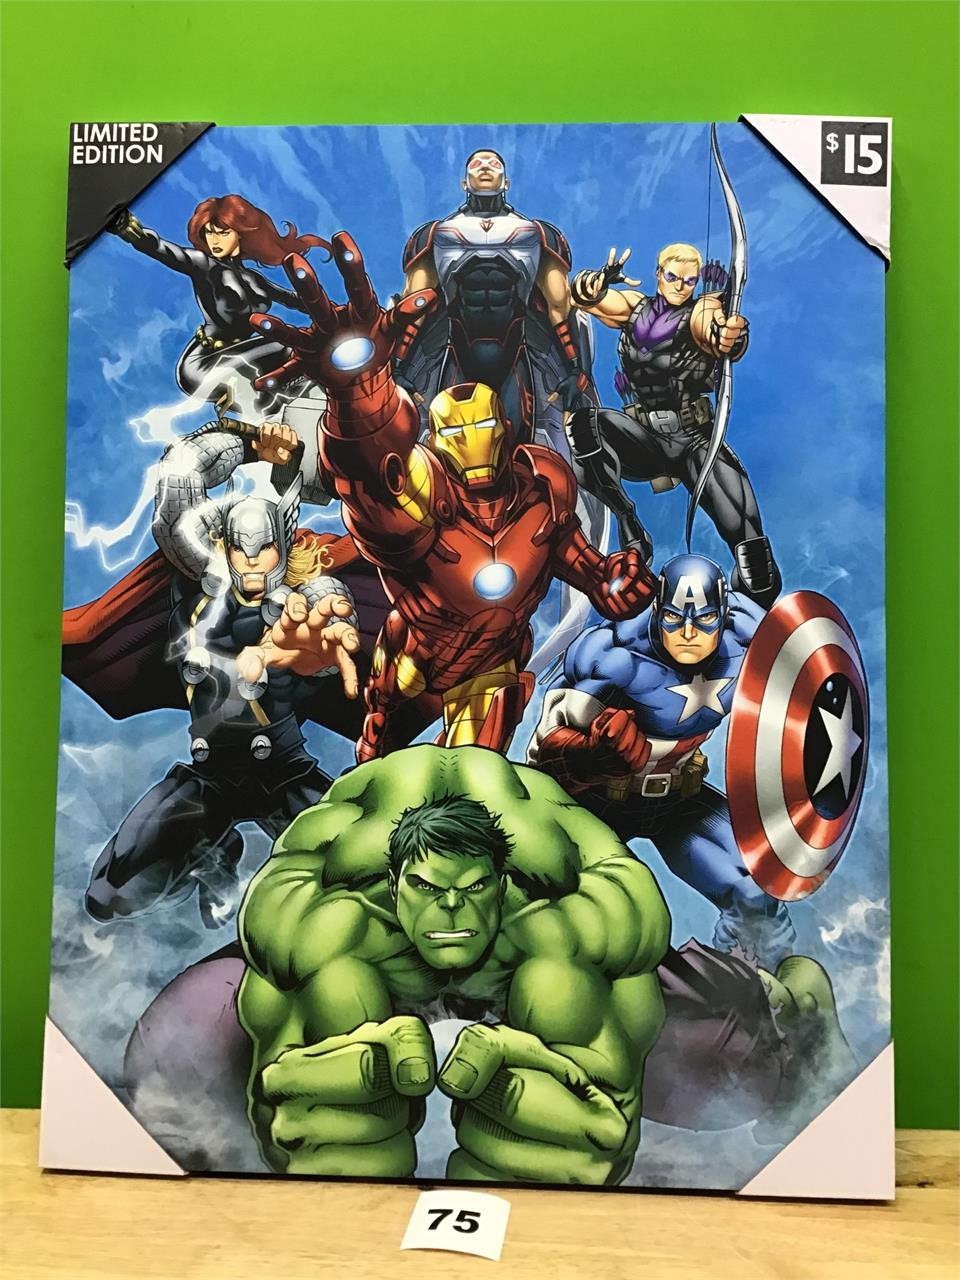 Limited Edition Avengers Stretched Canvas